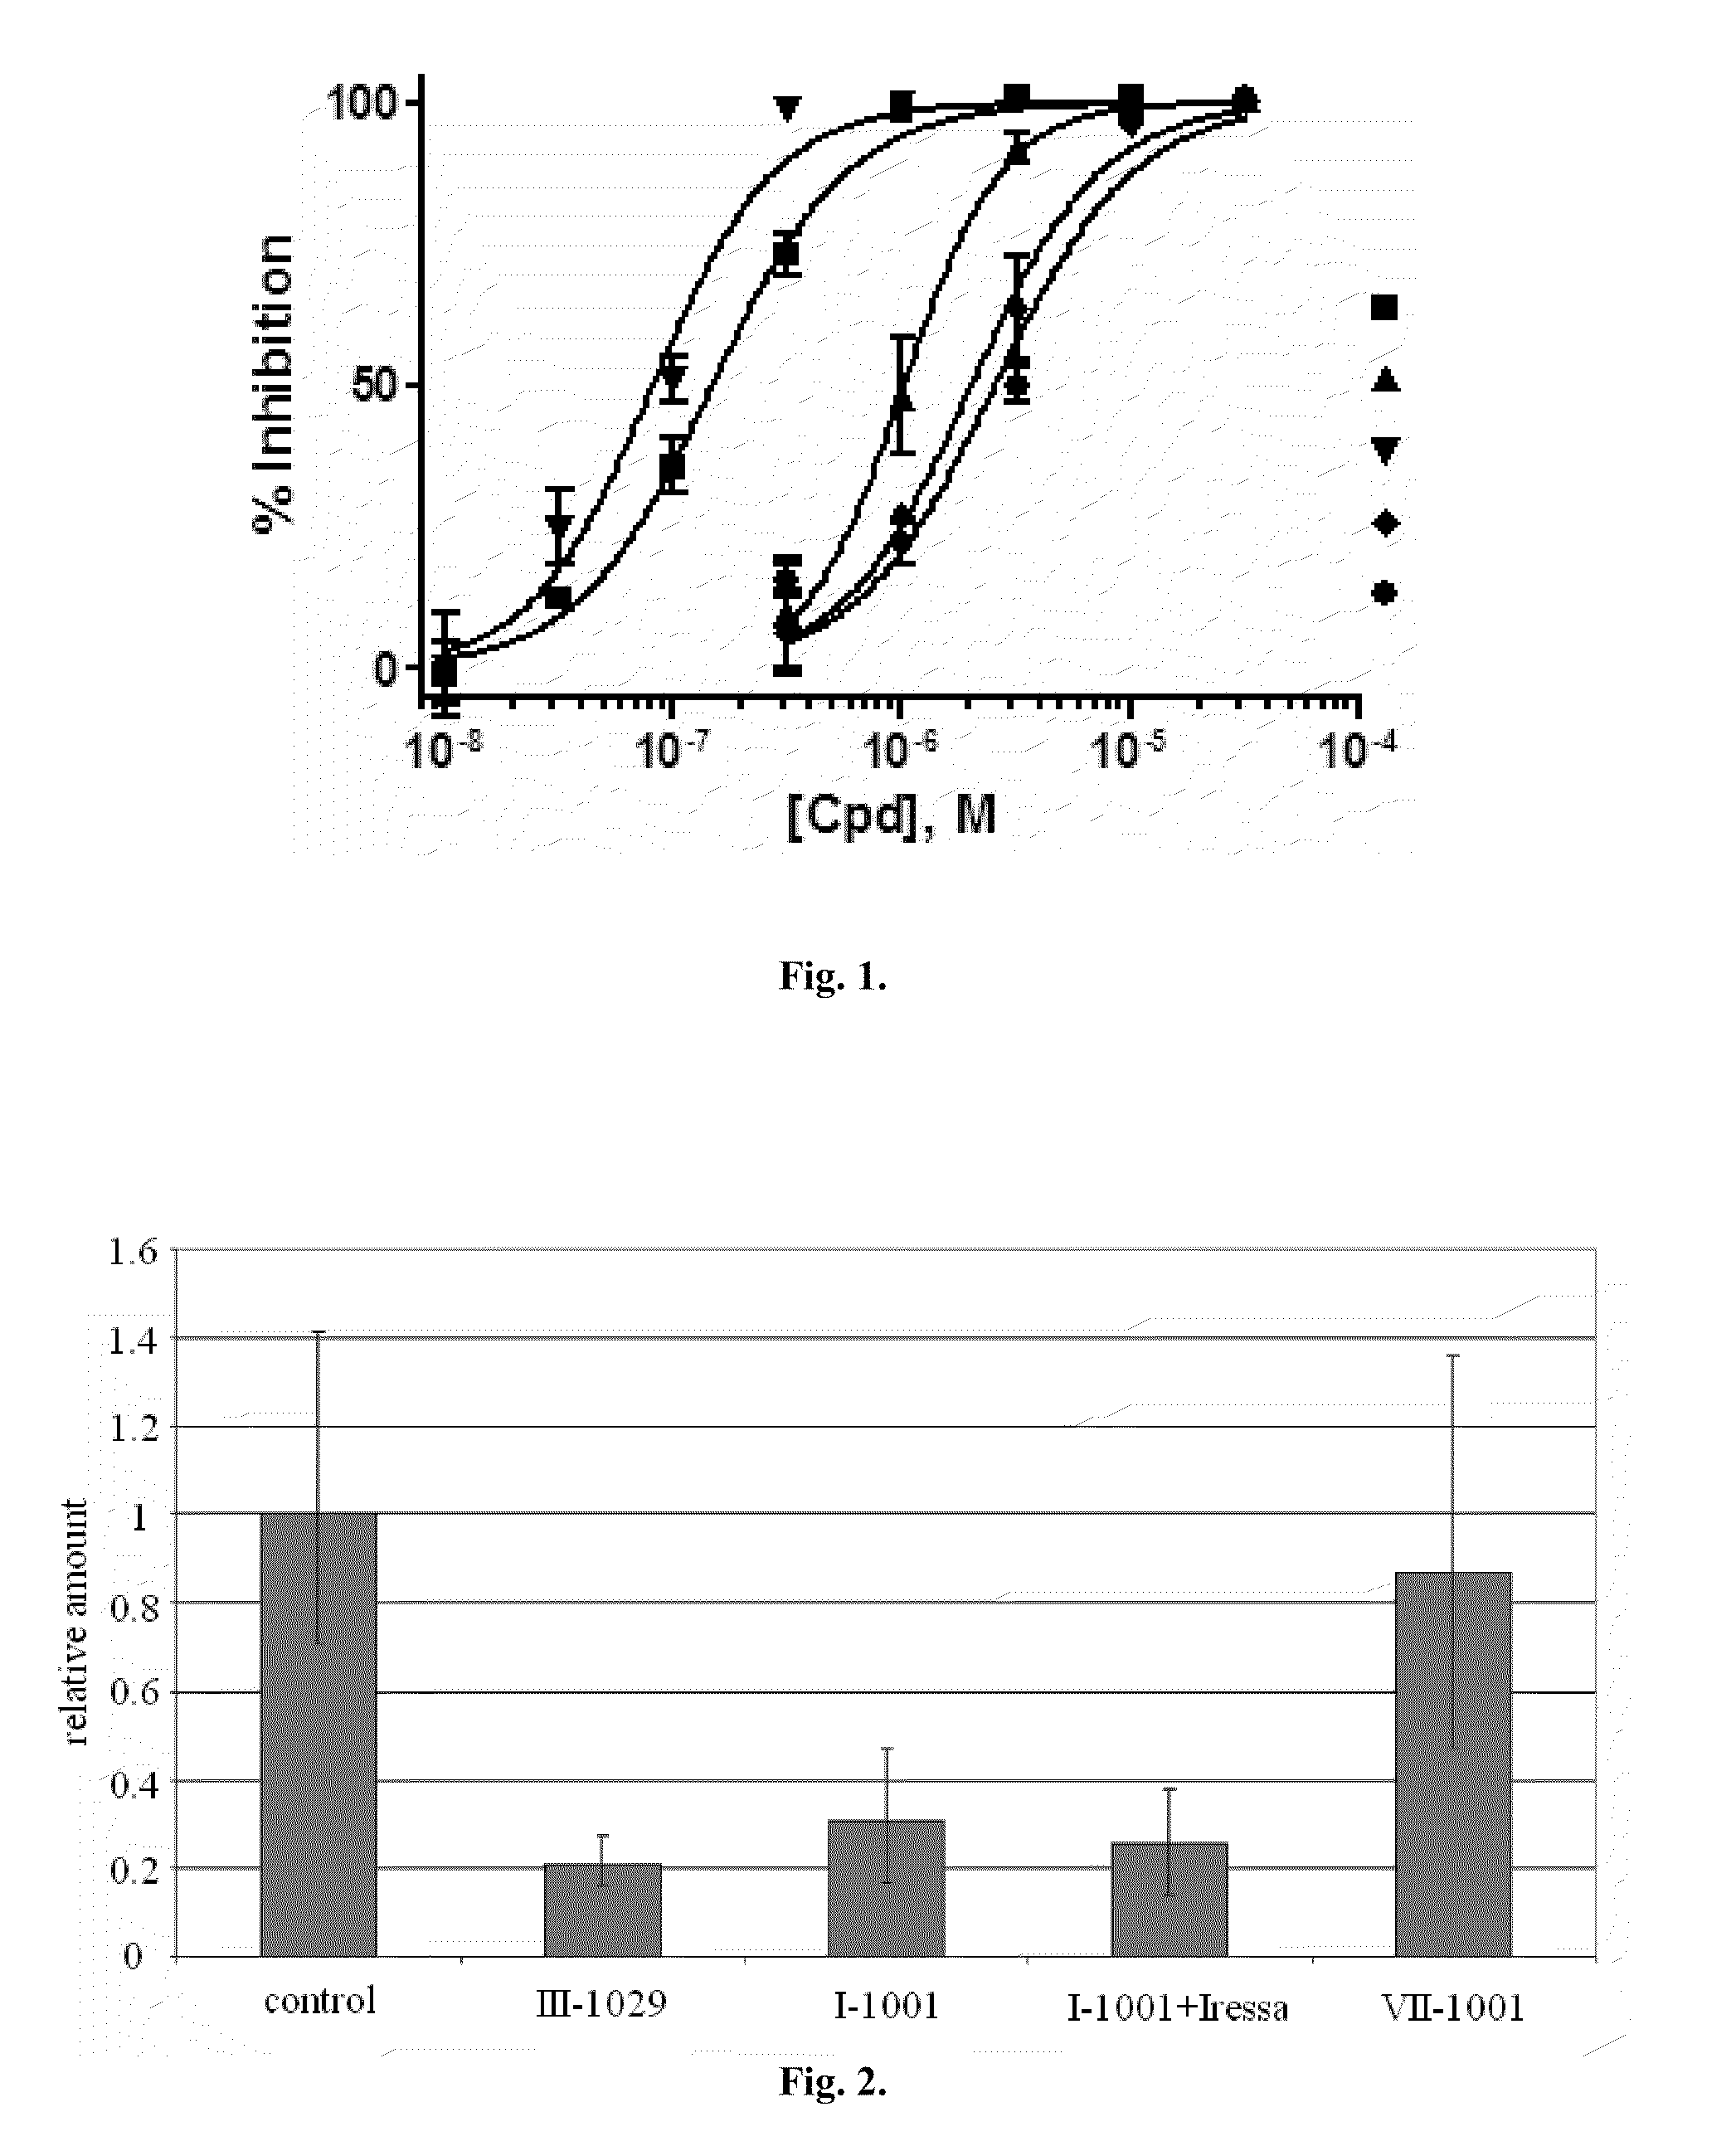 Heterocyclic inhibitors of an Hh-signal cascade, medicinal compositions based thereon and methods for treating diseases caused by the aberrant activity of an Hh-signal system